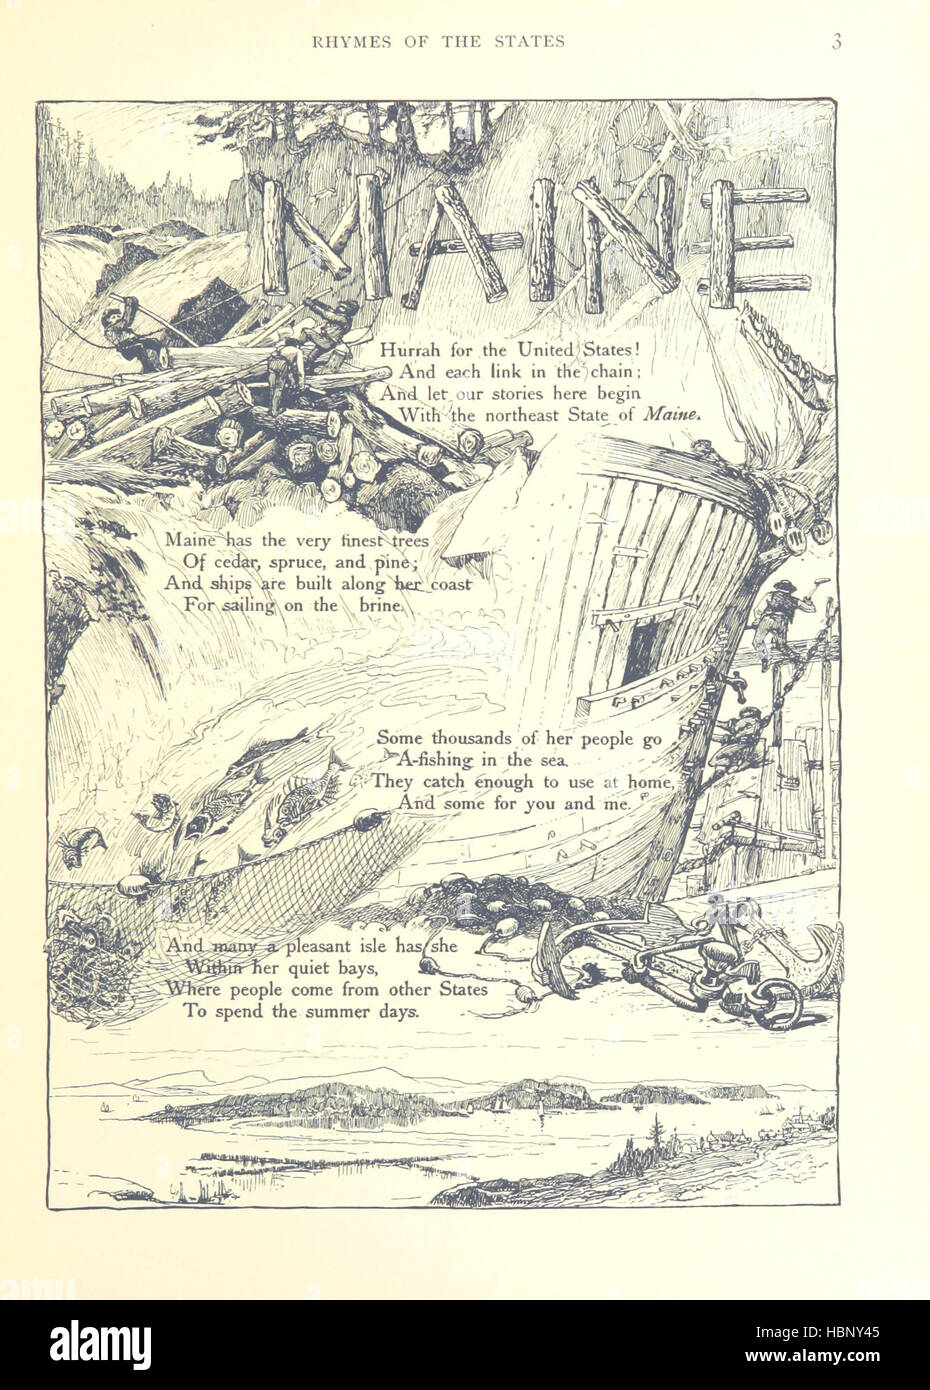 Image taken from page 17 of 'Rhymes of the States. With drawings, etc' Image taken from page 17 of 'Rhymes of the States Stock Photo